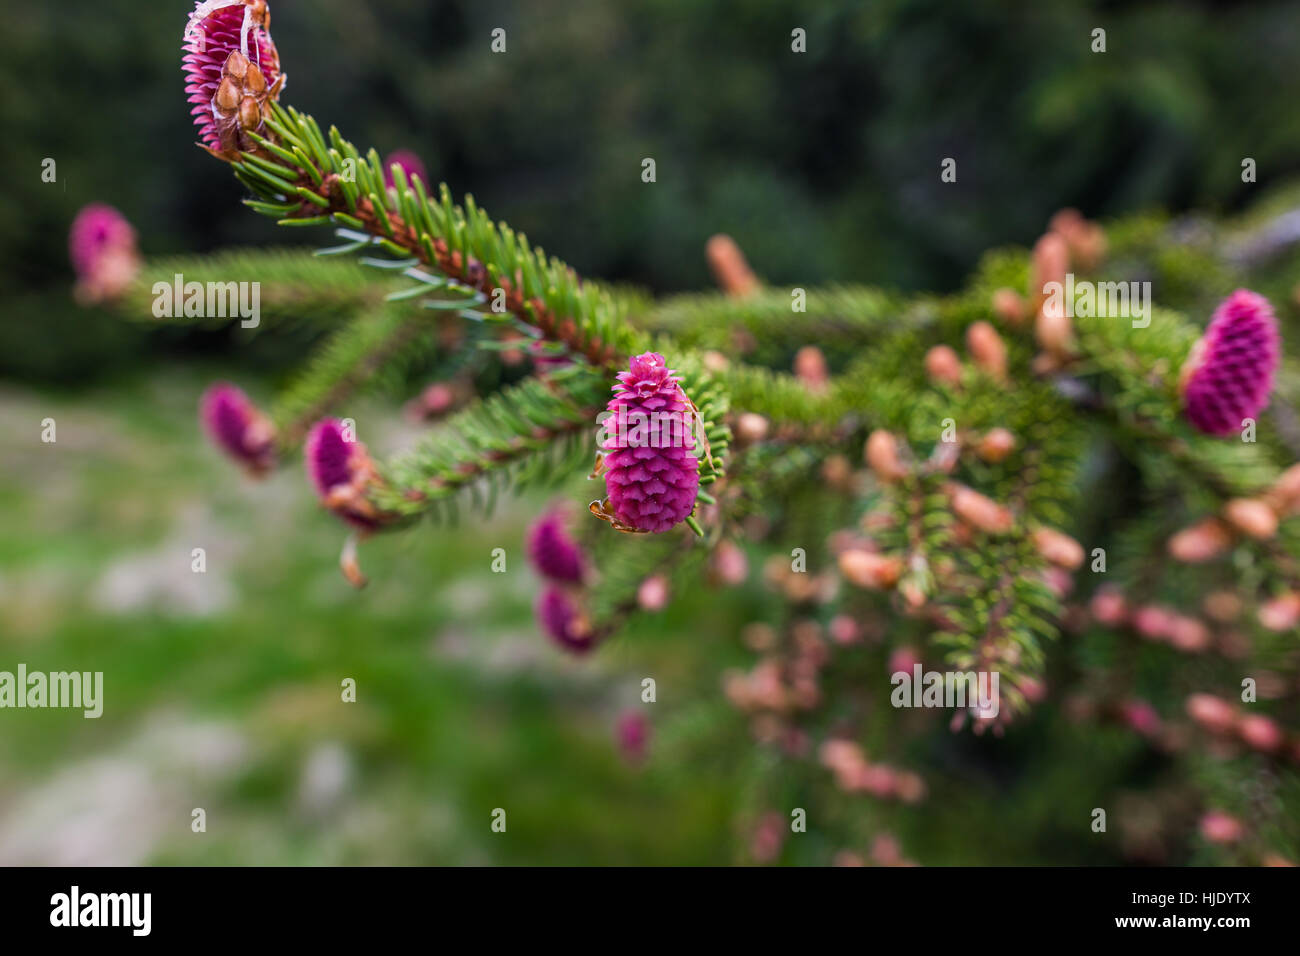 Young branch of spruce tree with conifer cones, focused on single pink beutiful new cone,High Tatras, Slovakia Stock Photo